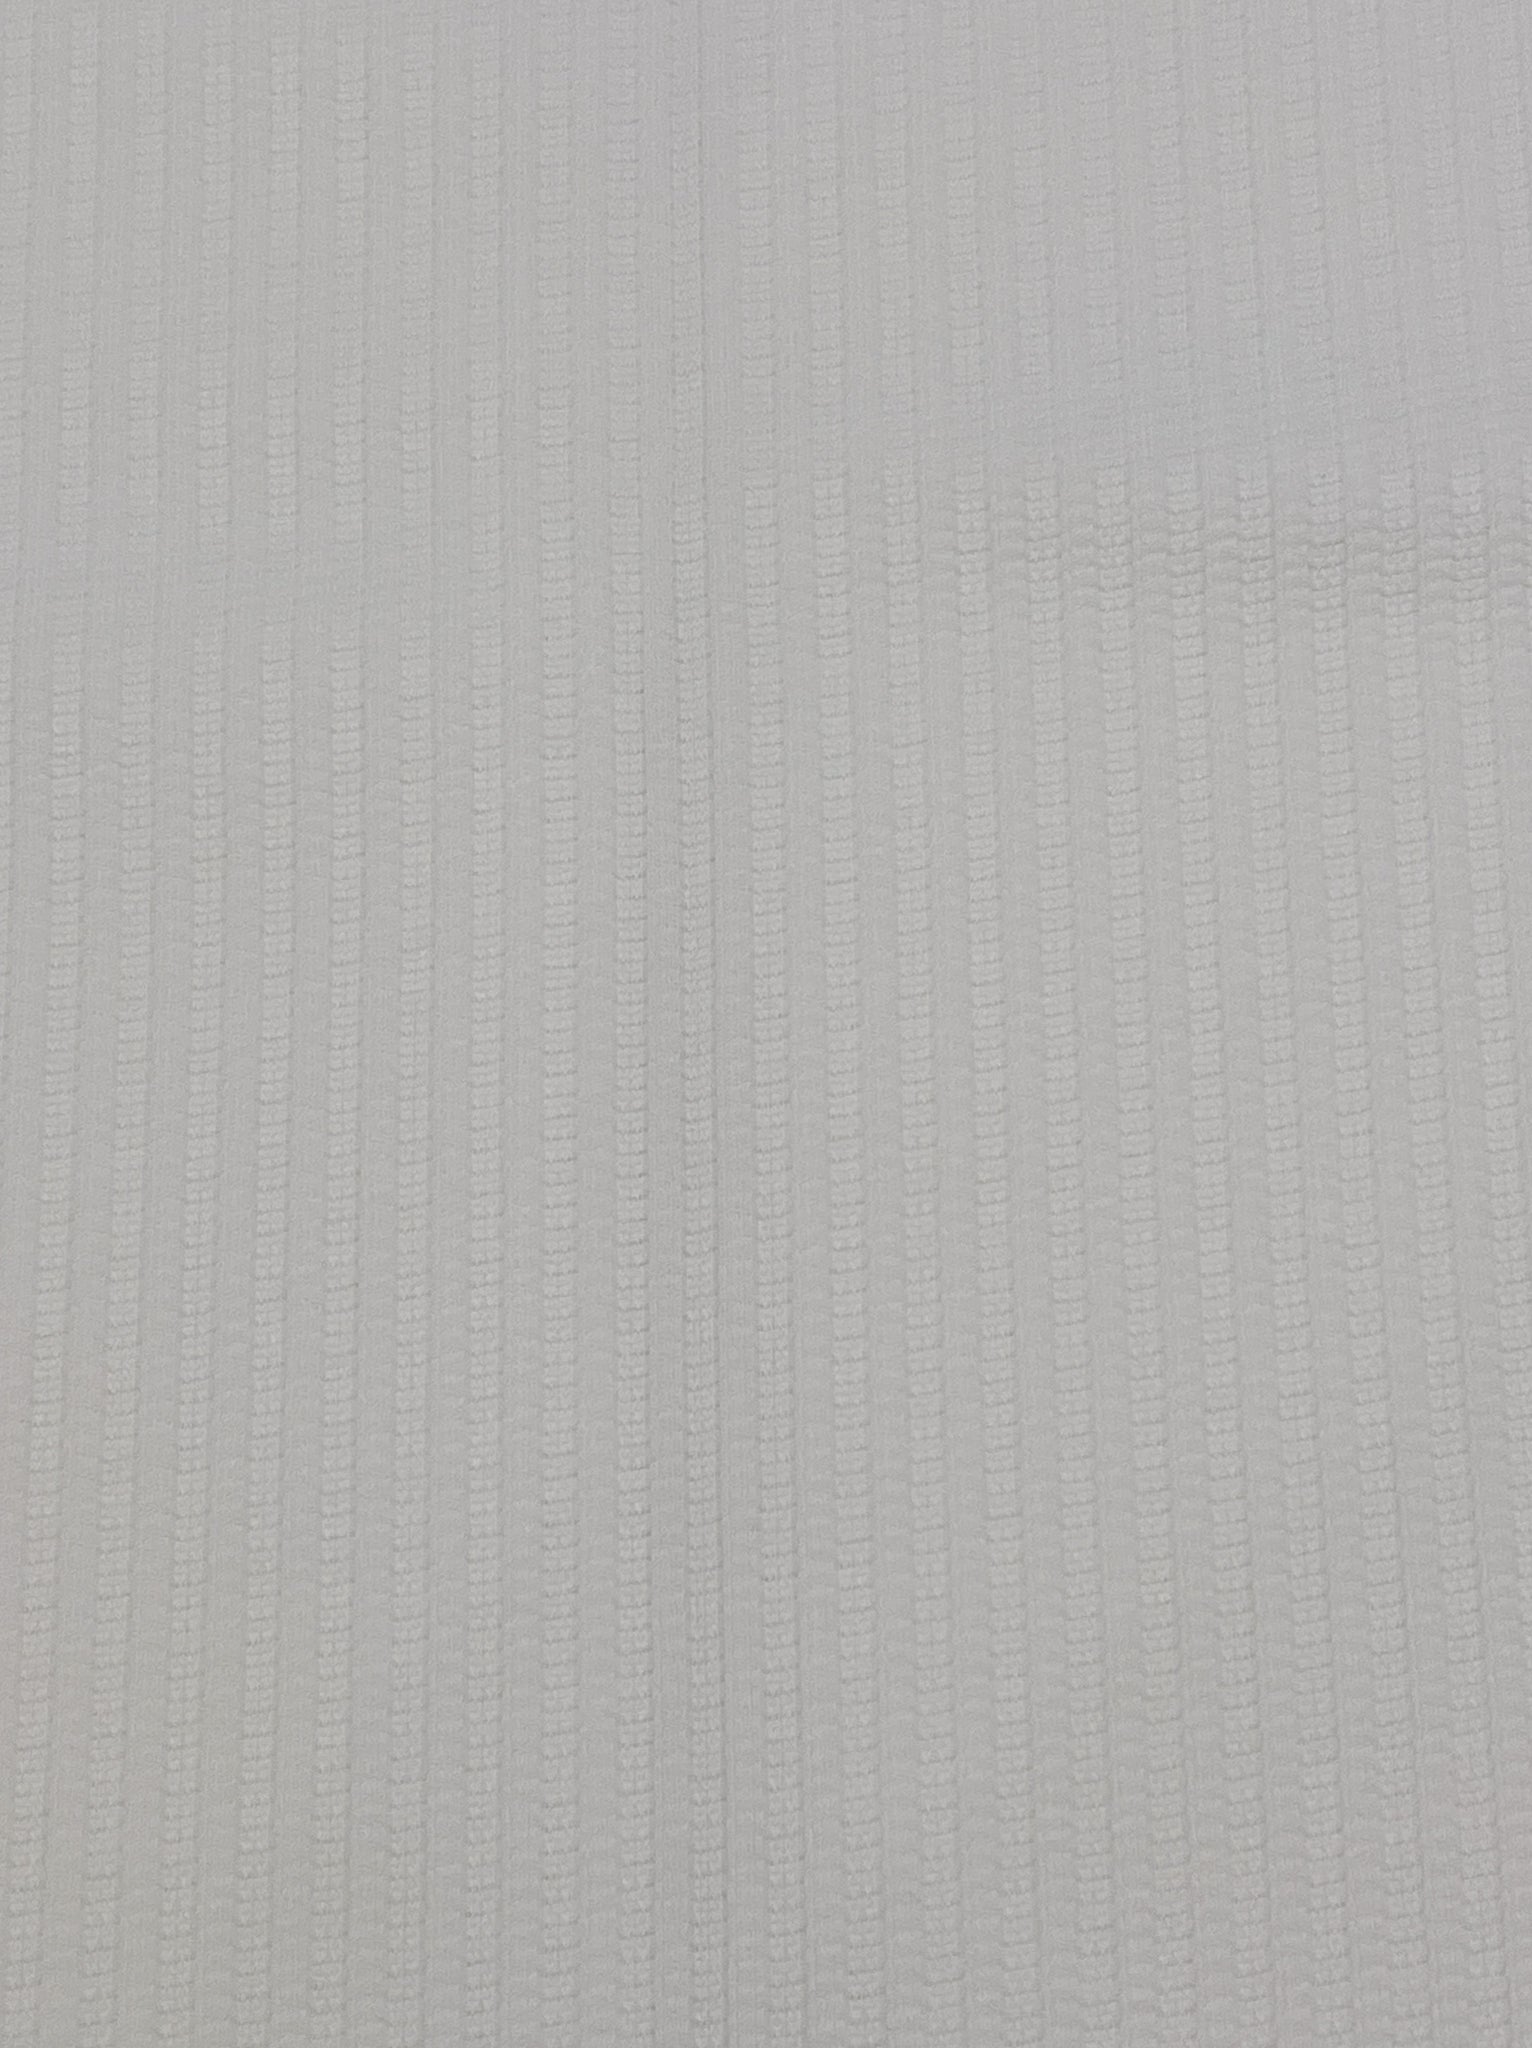 SALE 1 YD Vintage Polyester Double Knit - White